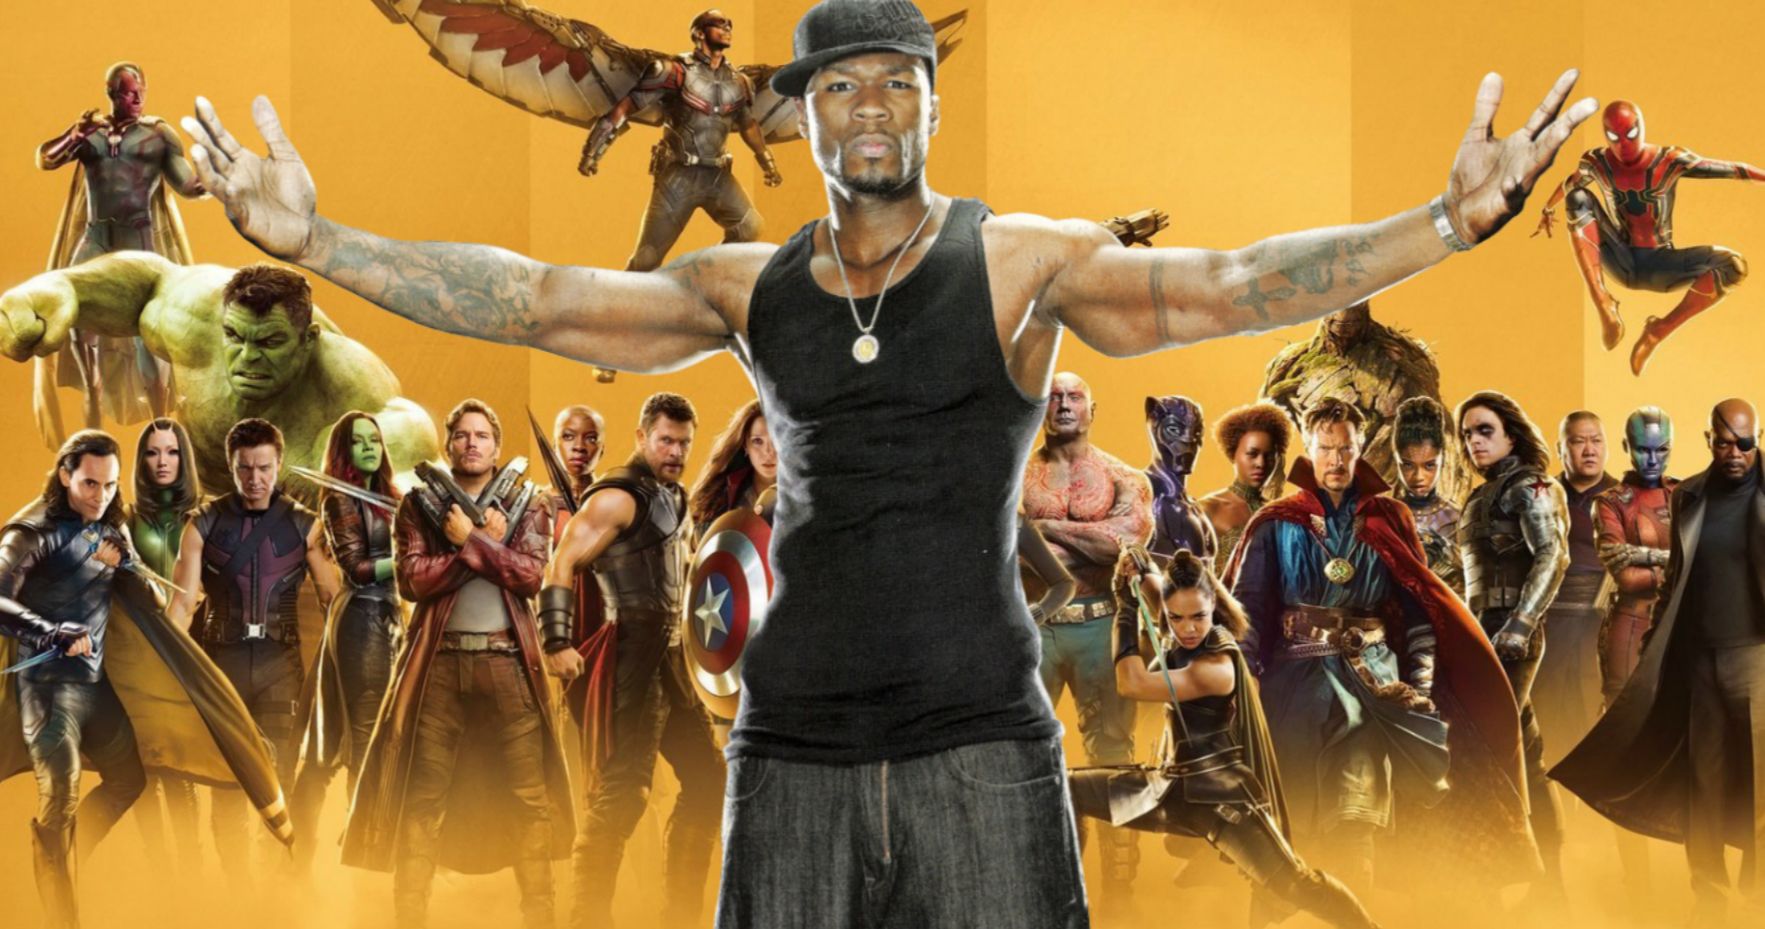 50 Cent Offers to Direct Next Marvel Movie, as Long as It Doesn't Take Too Much Time